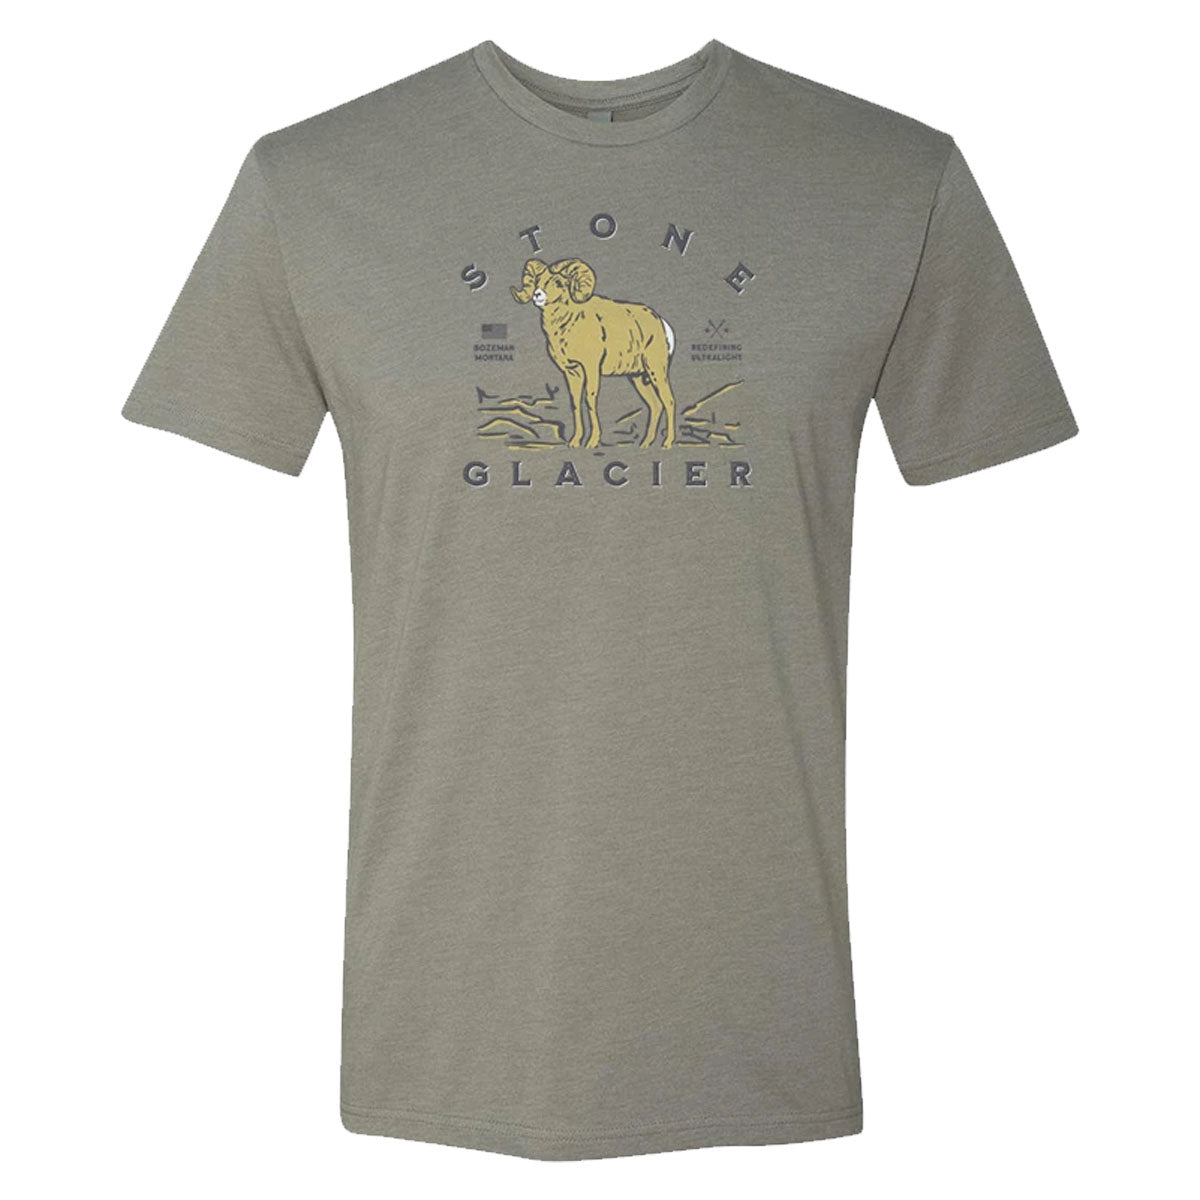 Stone Glacier Golden Ram T-Shirt in  by GOHUNT | Stone Glacier - GOHUNT Shop